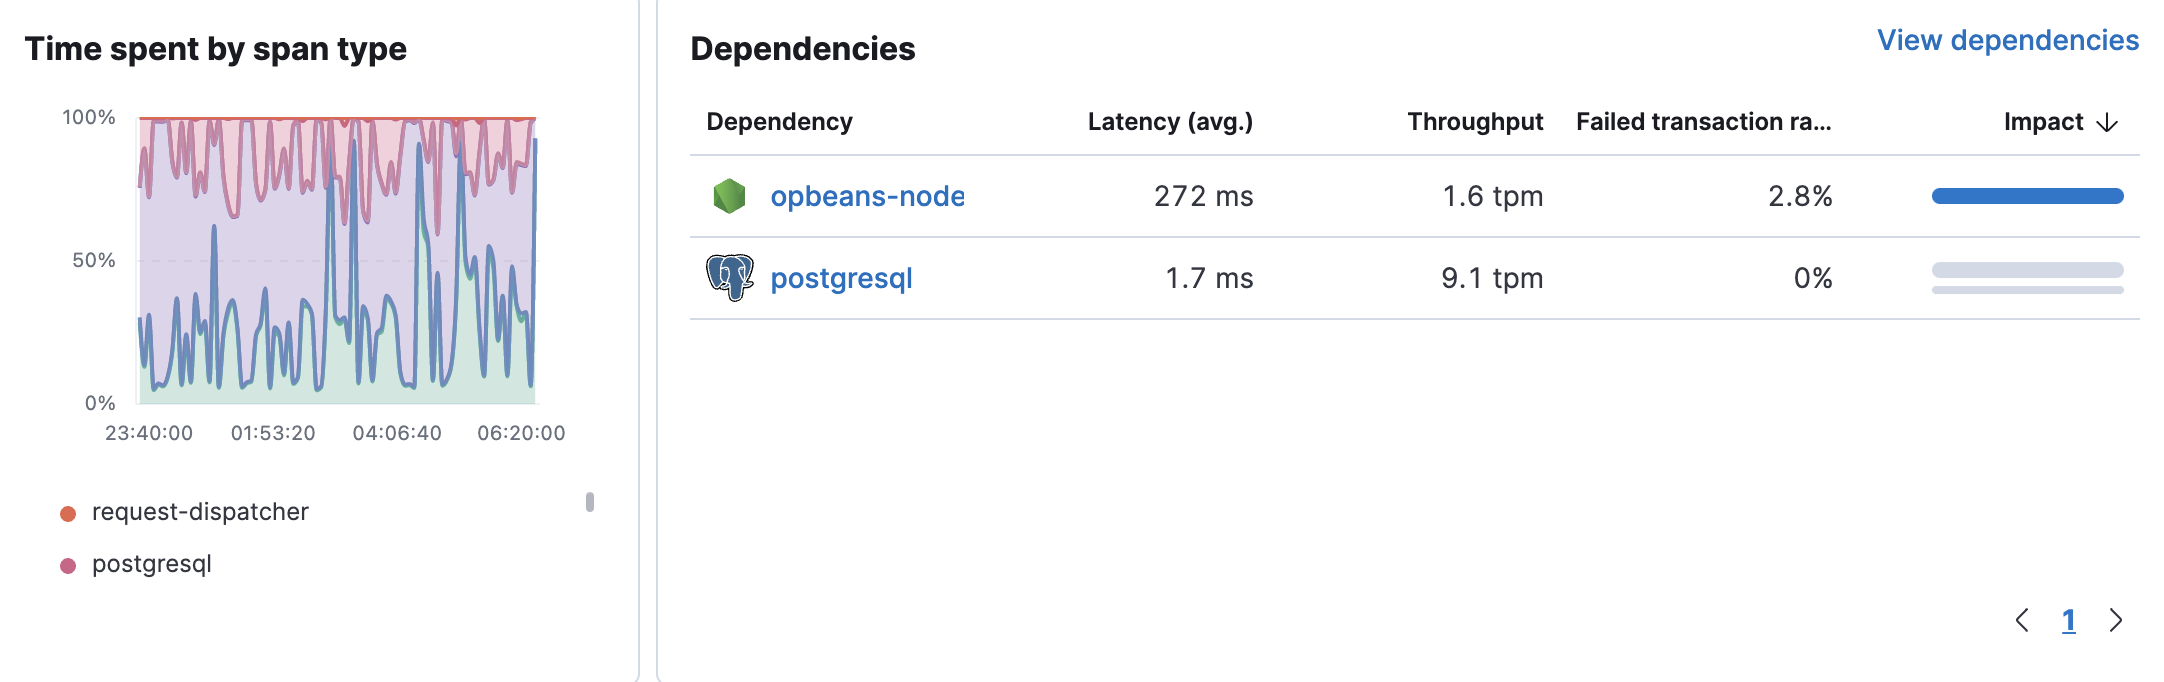 Span type duration and dependencies